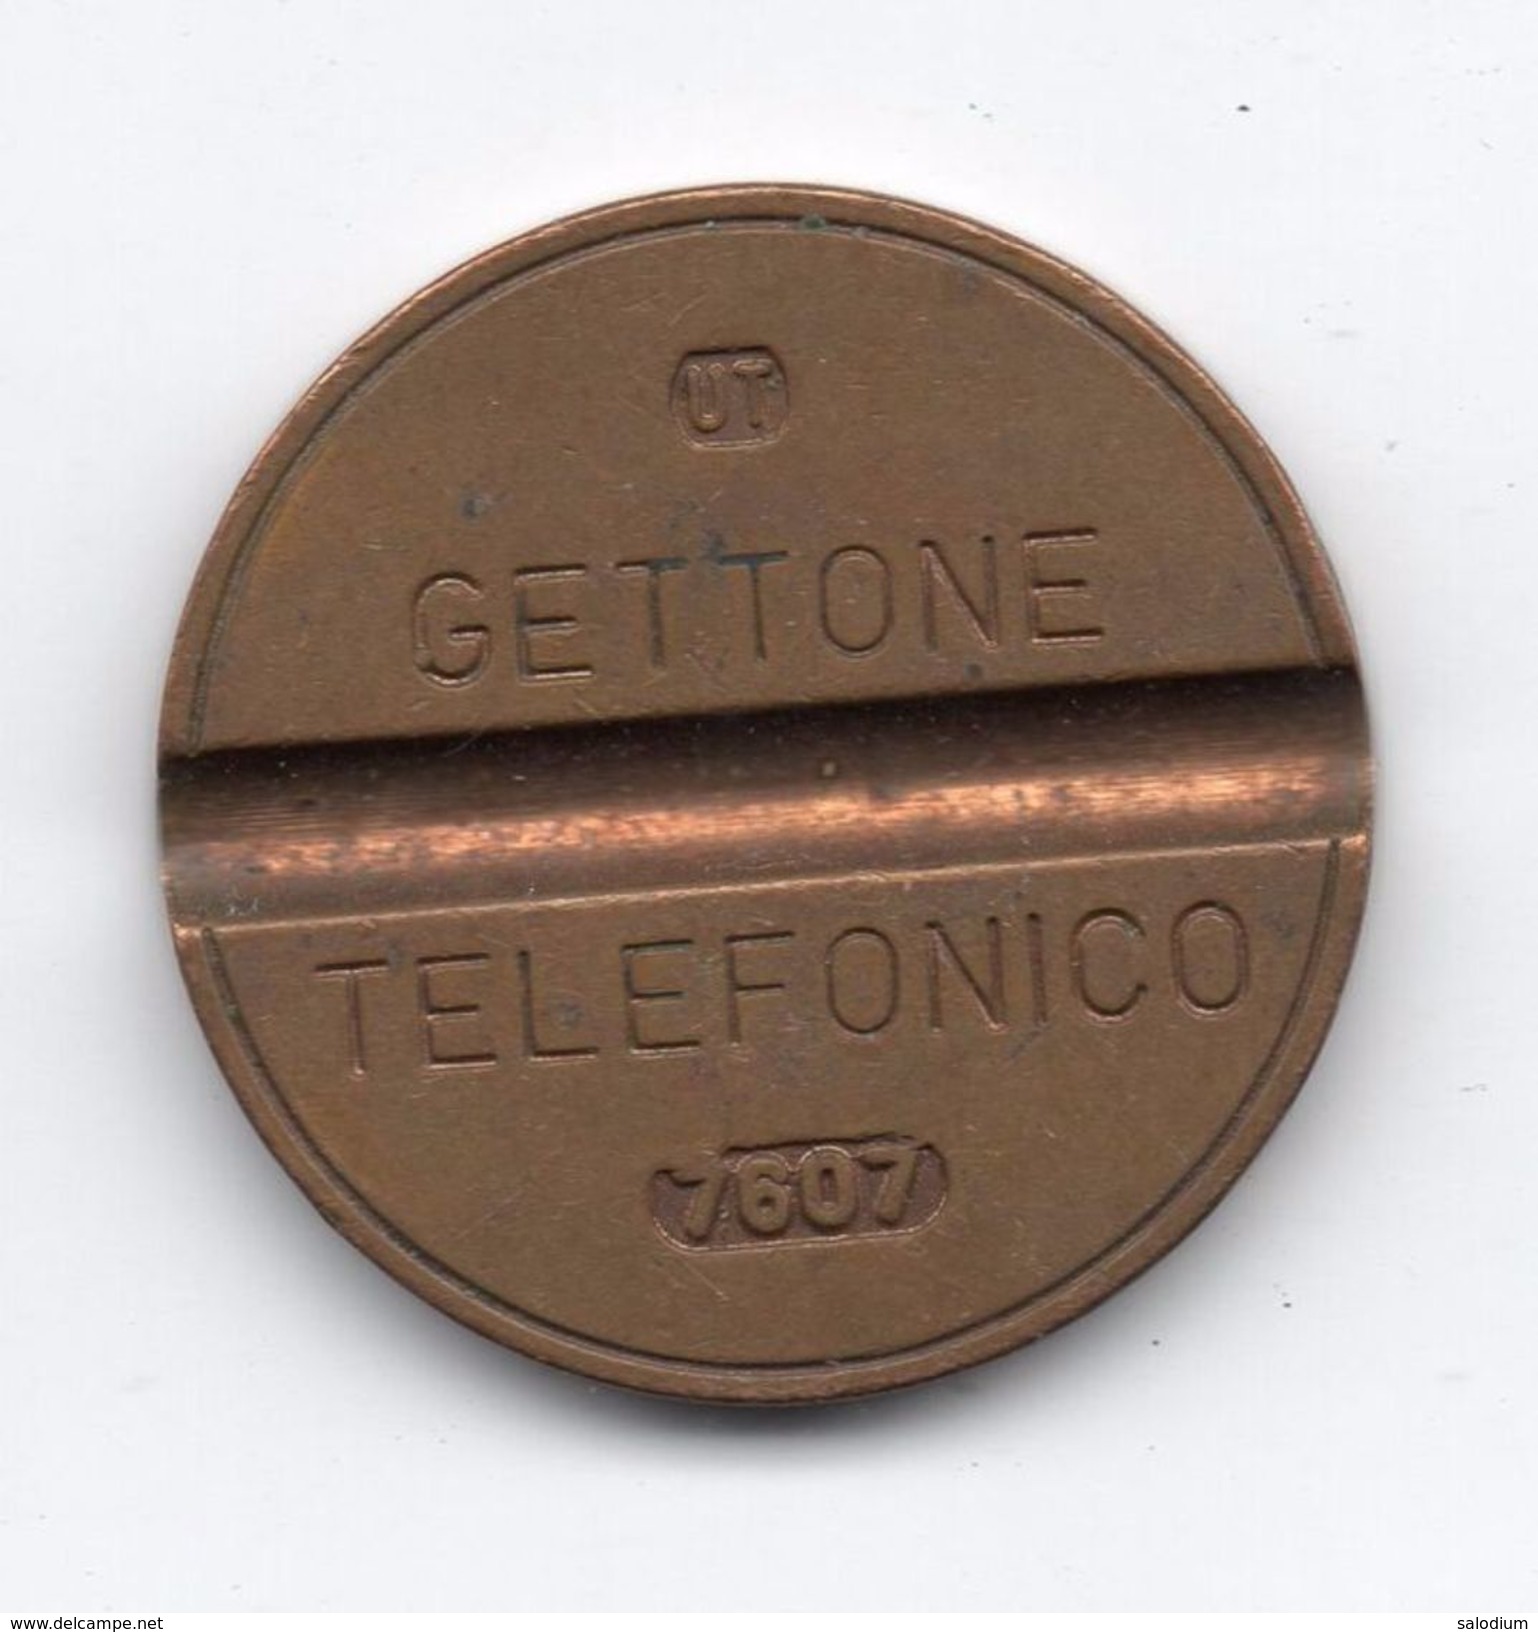 Gettone Telefonico 7607 Token Telephone - (Id-787) - Professionals/Firms